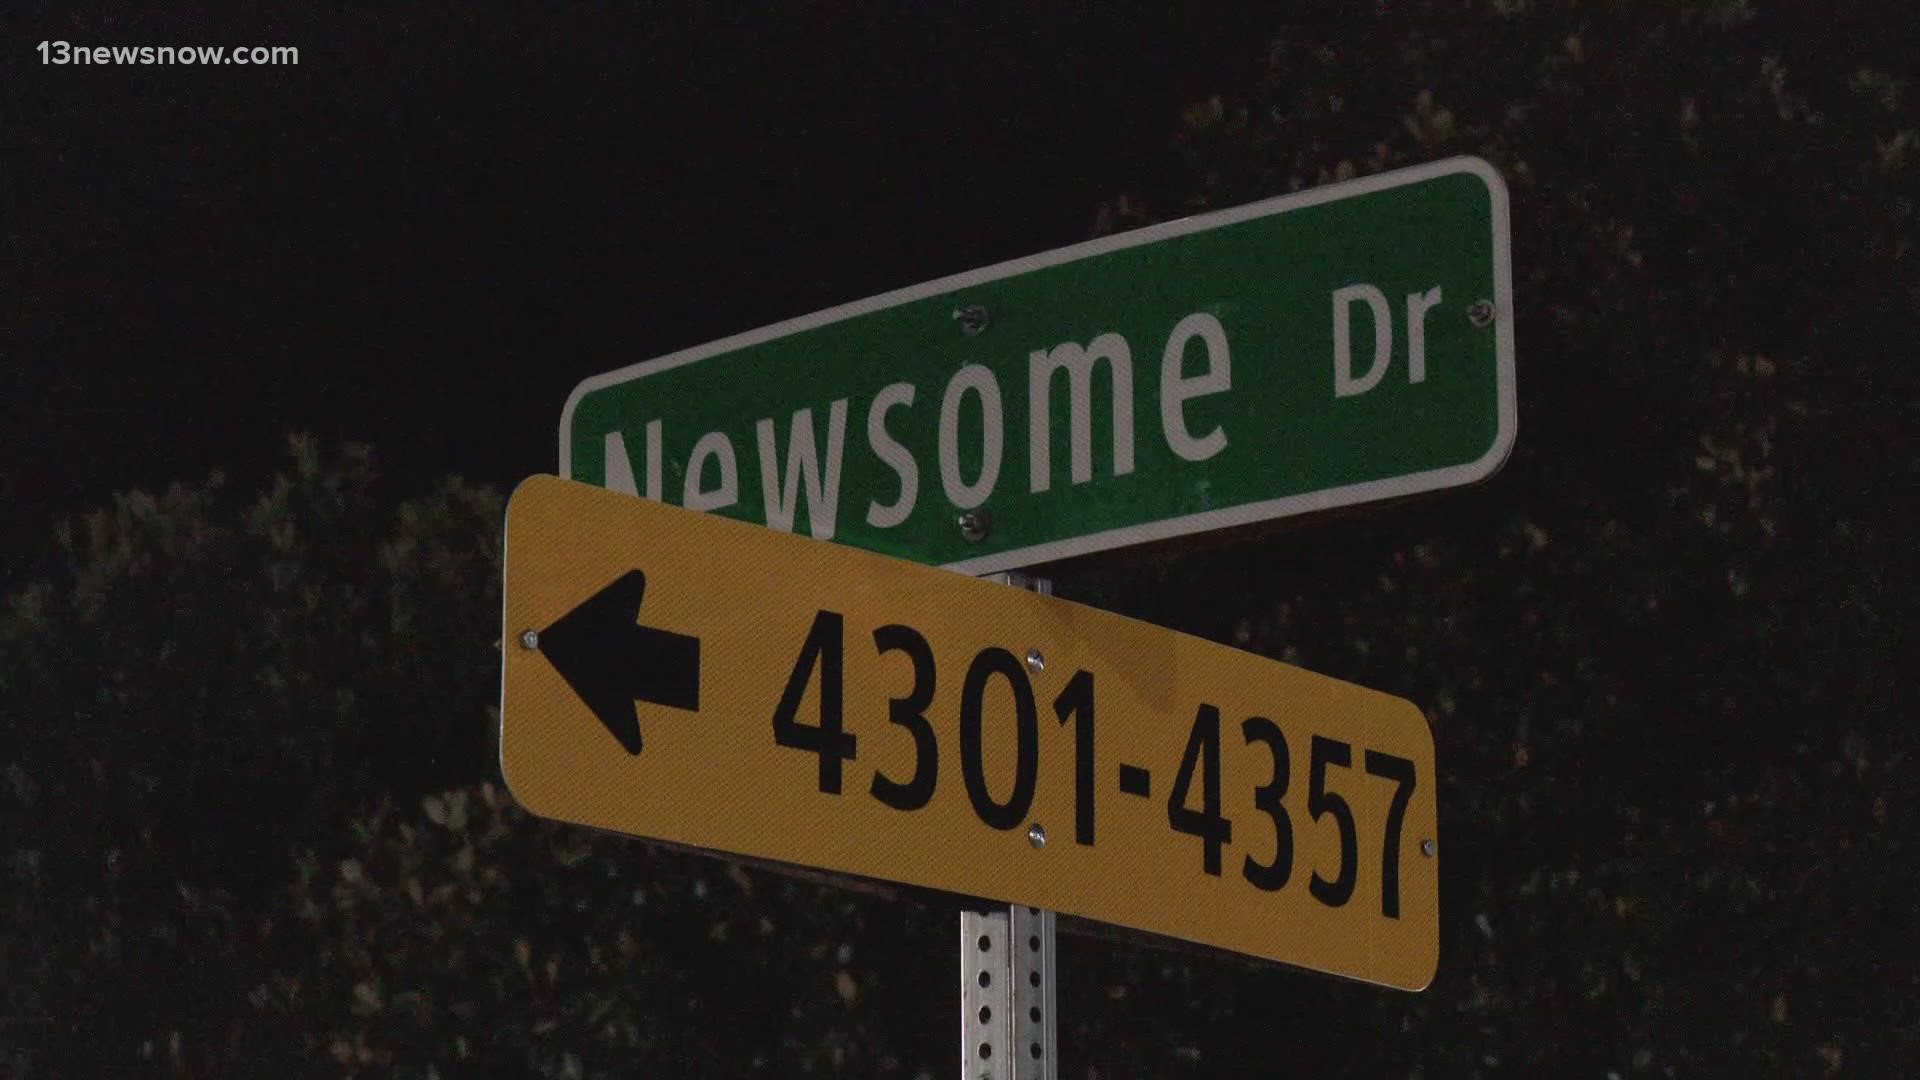 According to the police department, officers found a woman dead in her apartment after conducting a welfare check in the 4300 block of Newsome Drive.